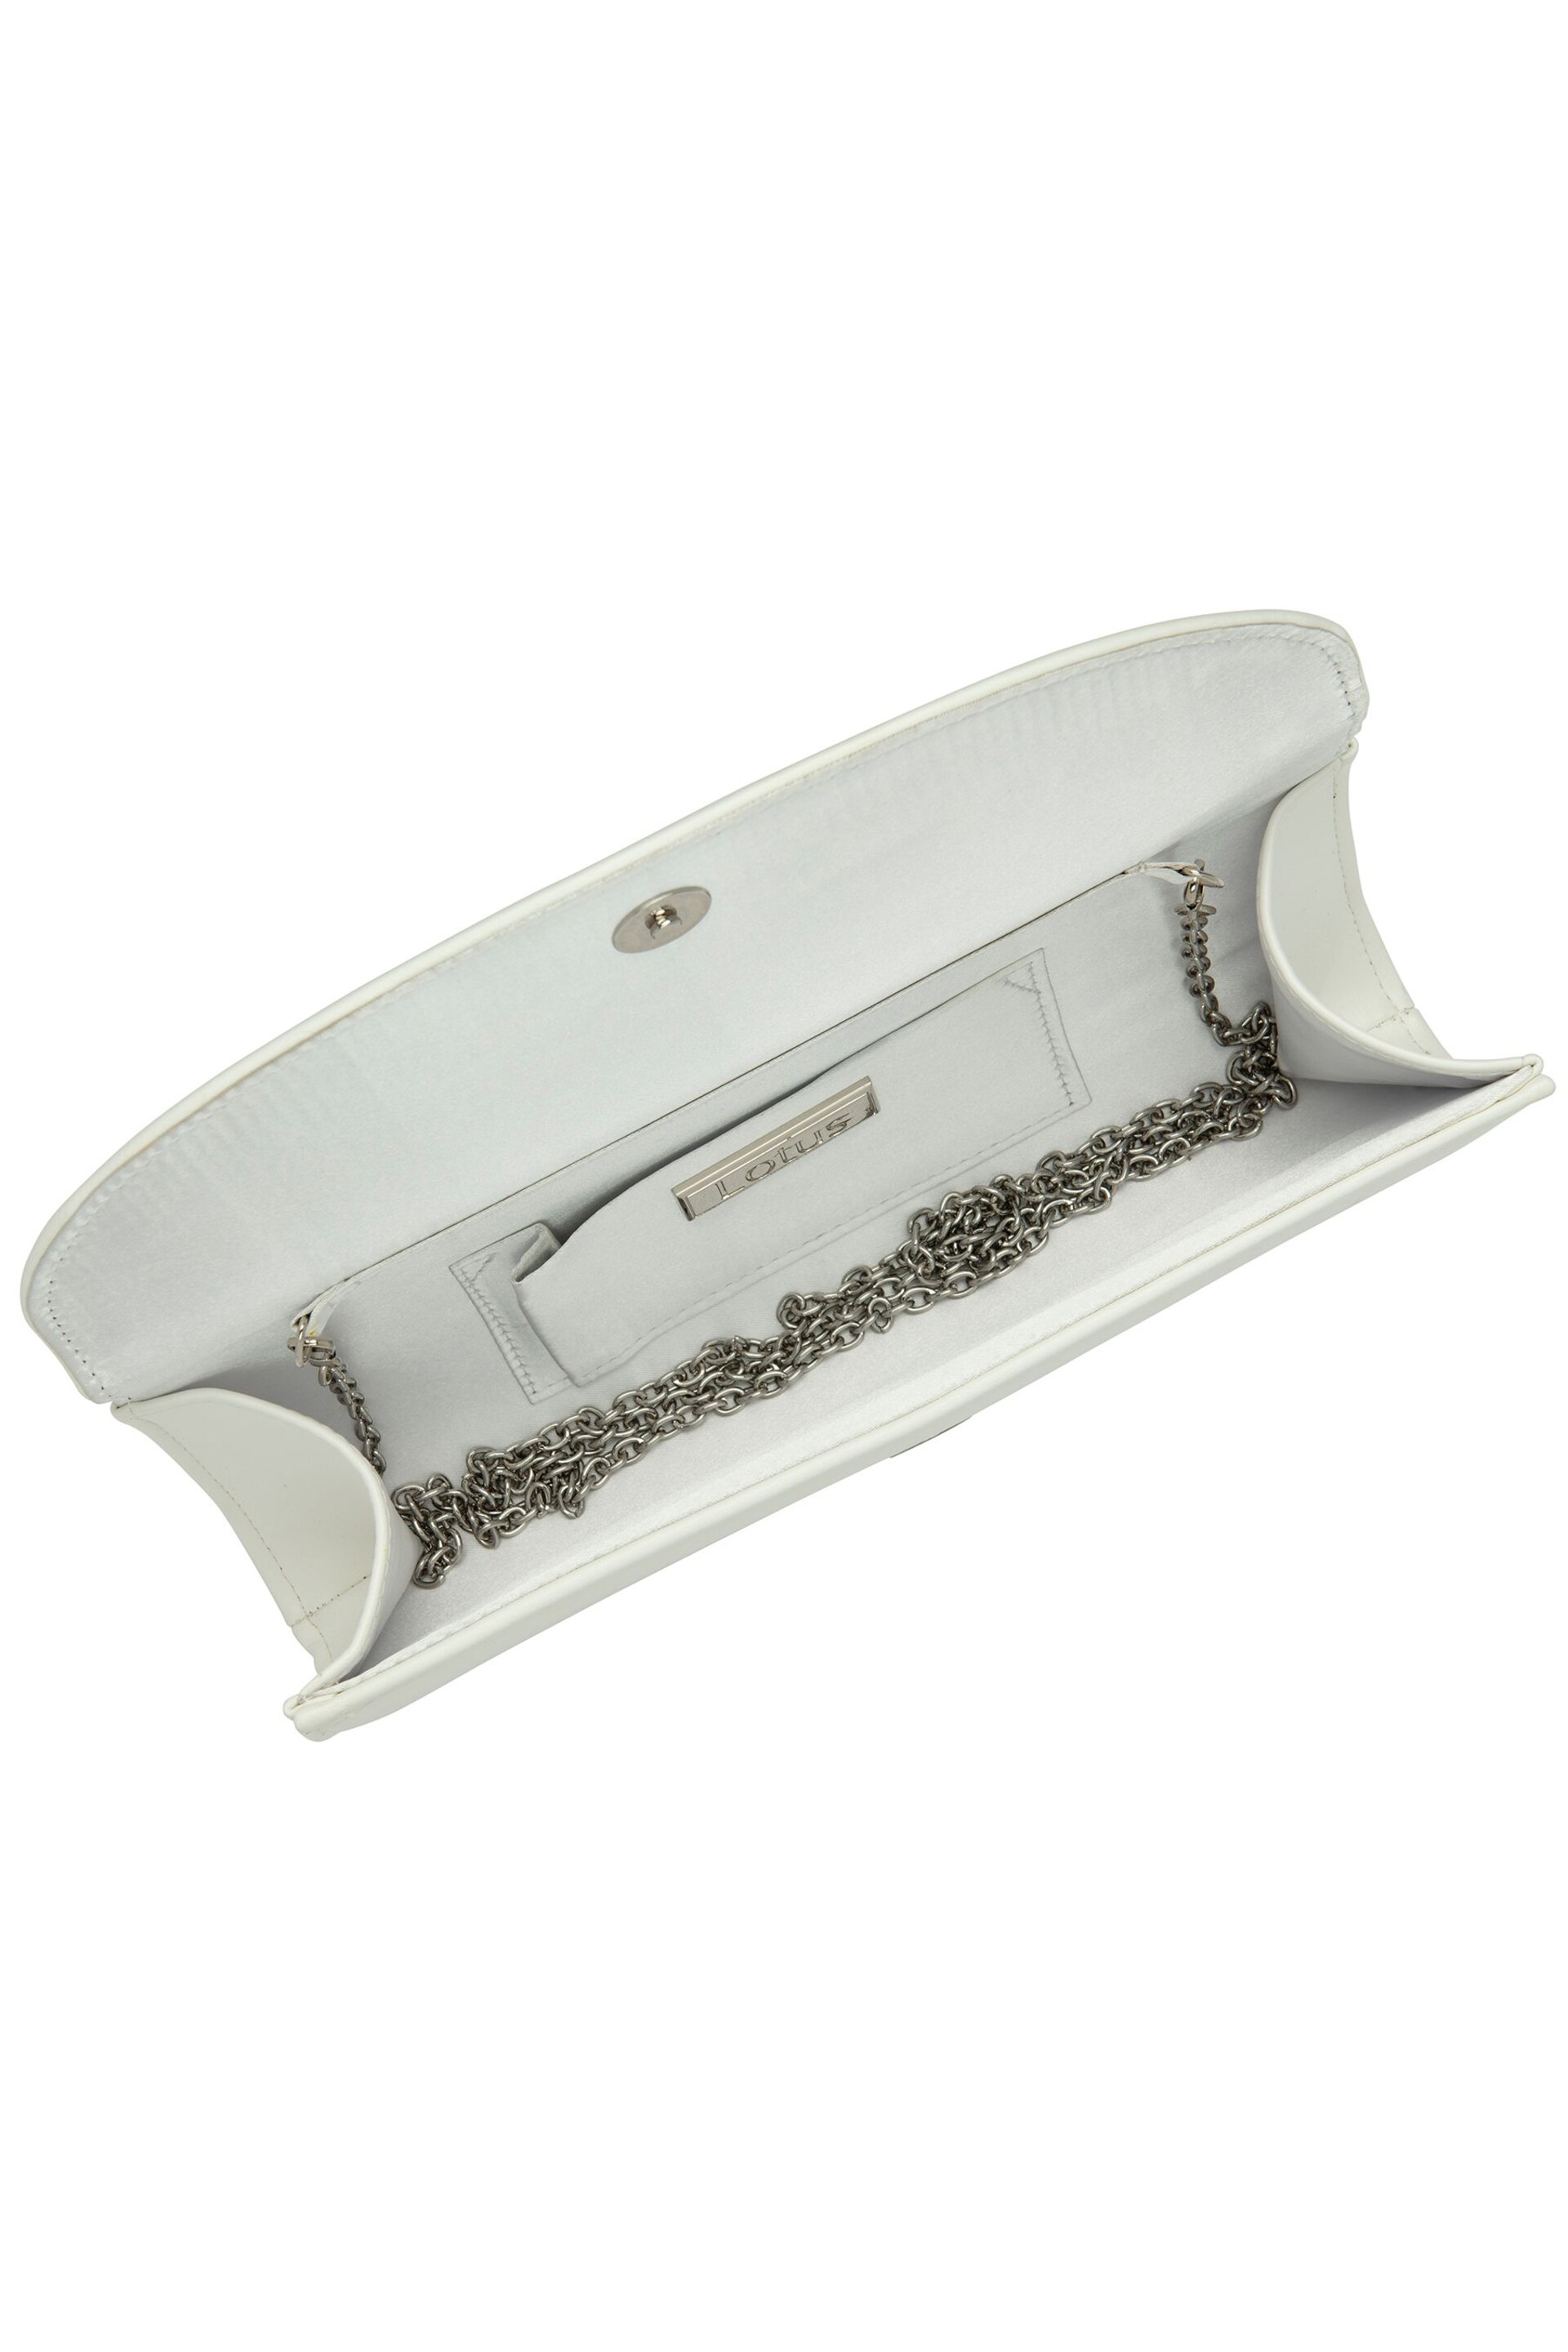 Lotus White Clutch Bag with Chain - Image 4 of 4